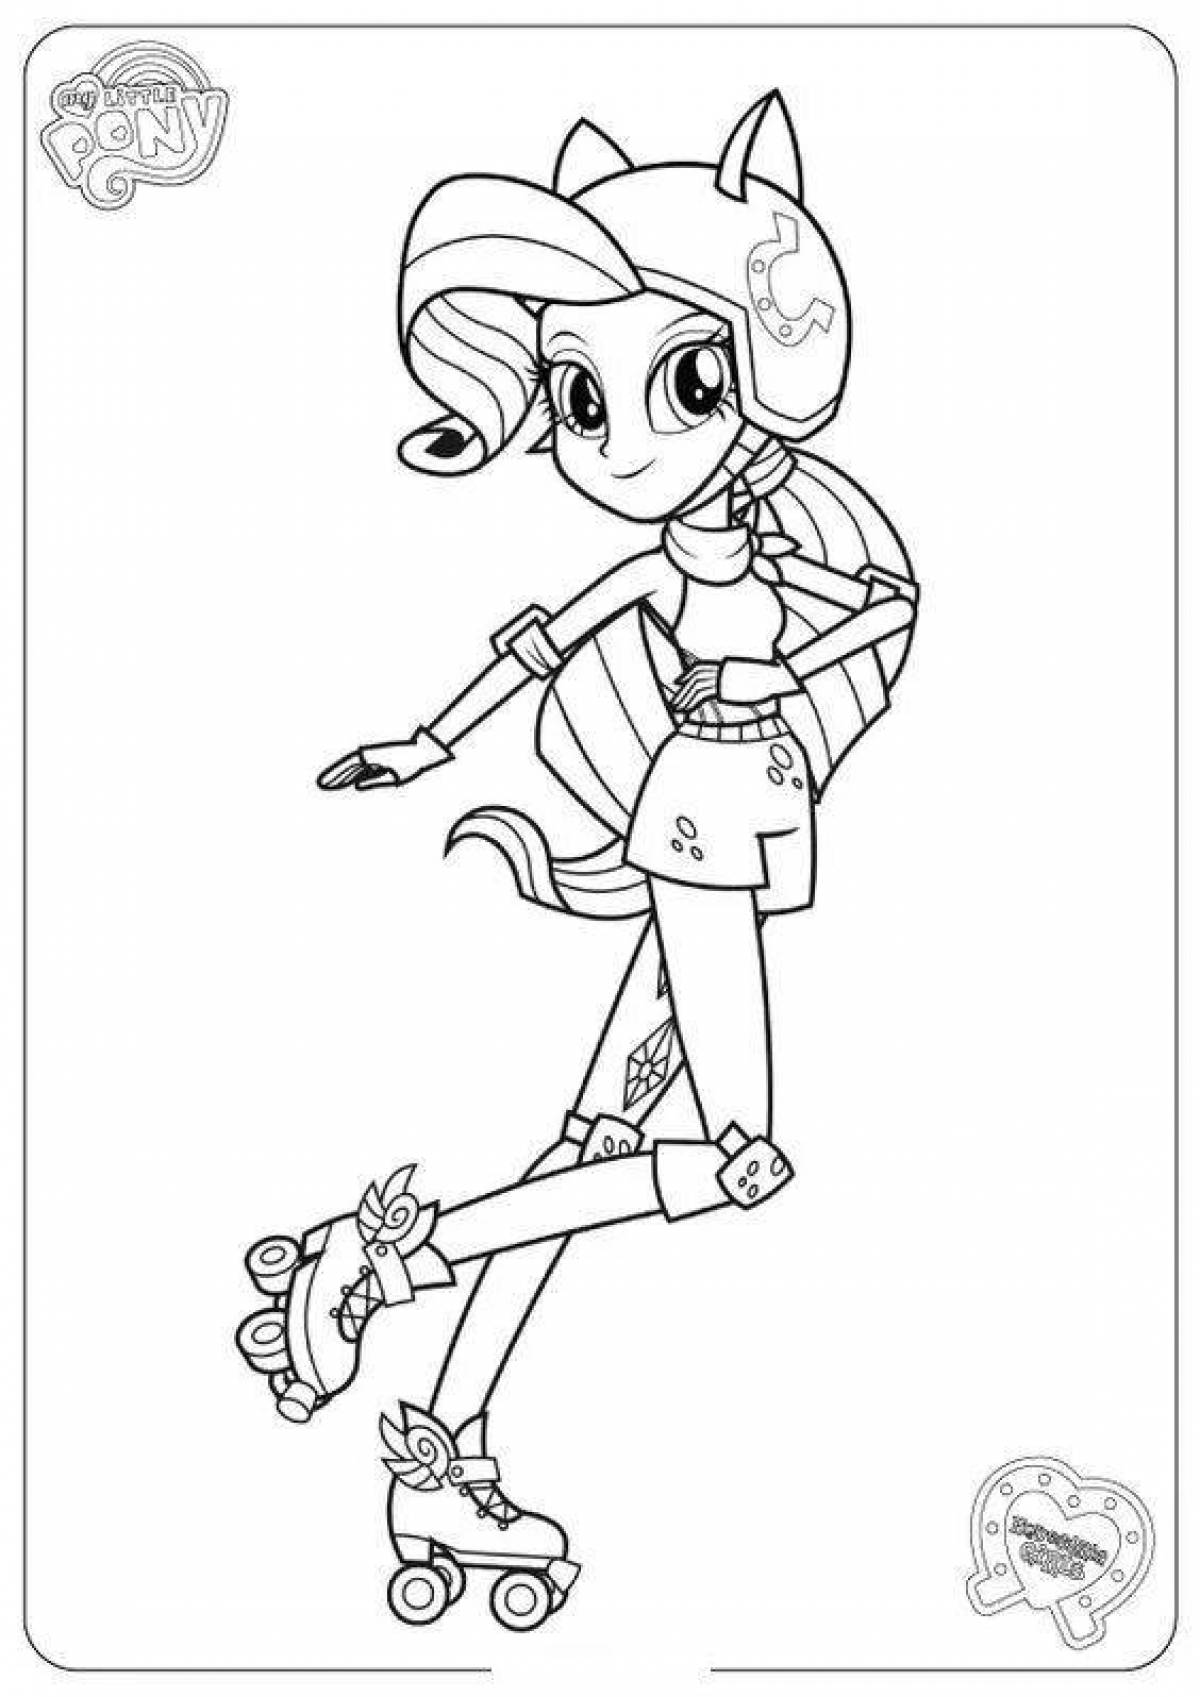 Adorable rainbow high coloring page